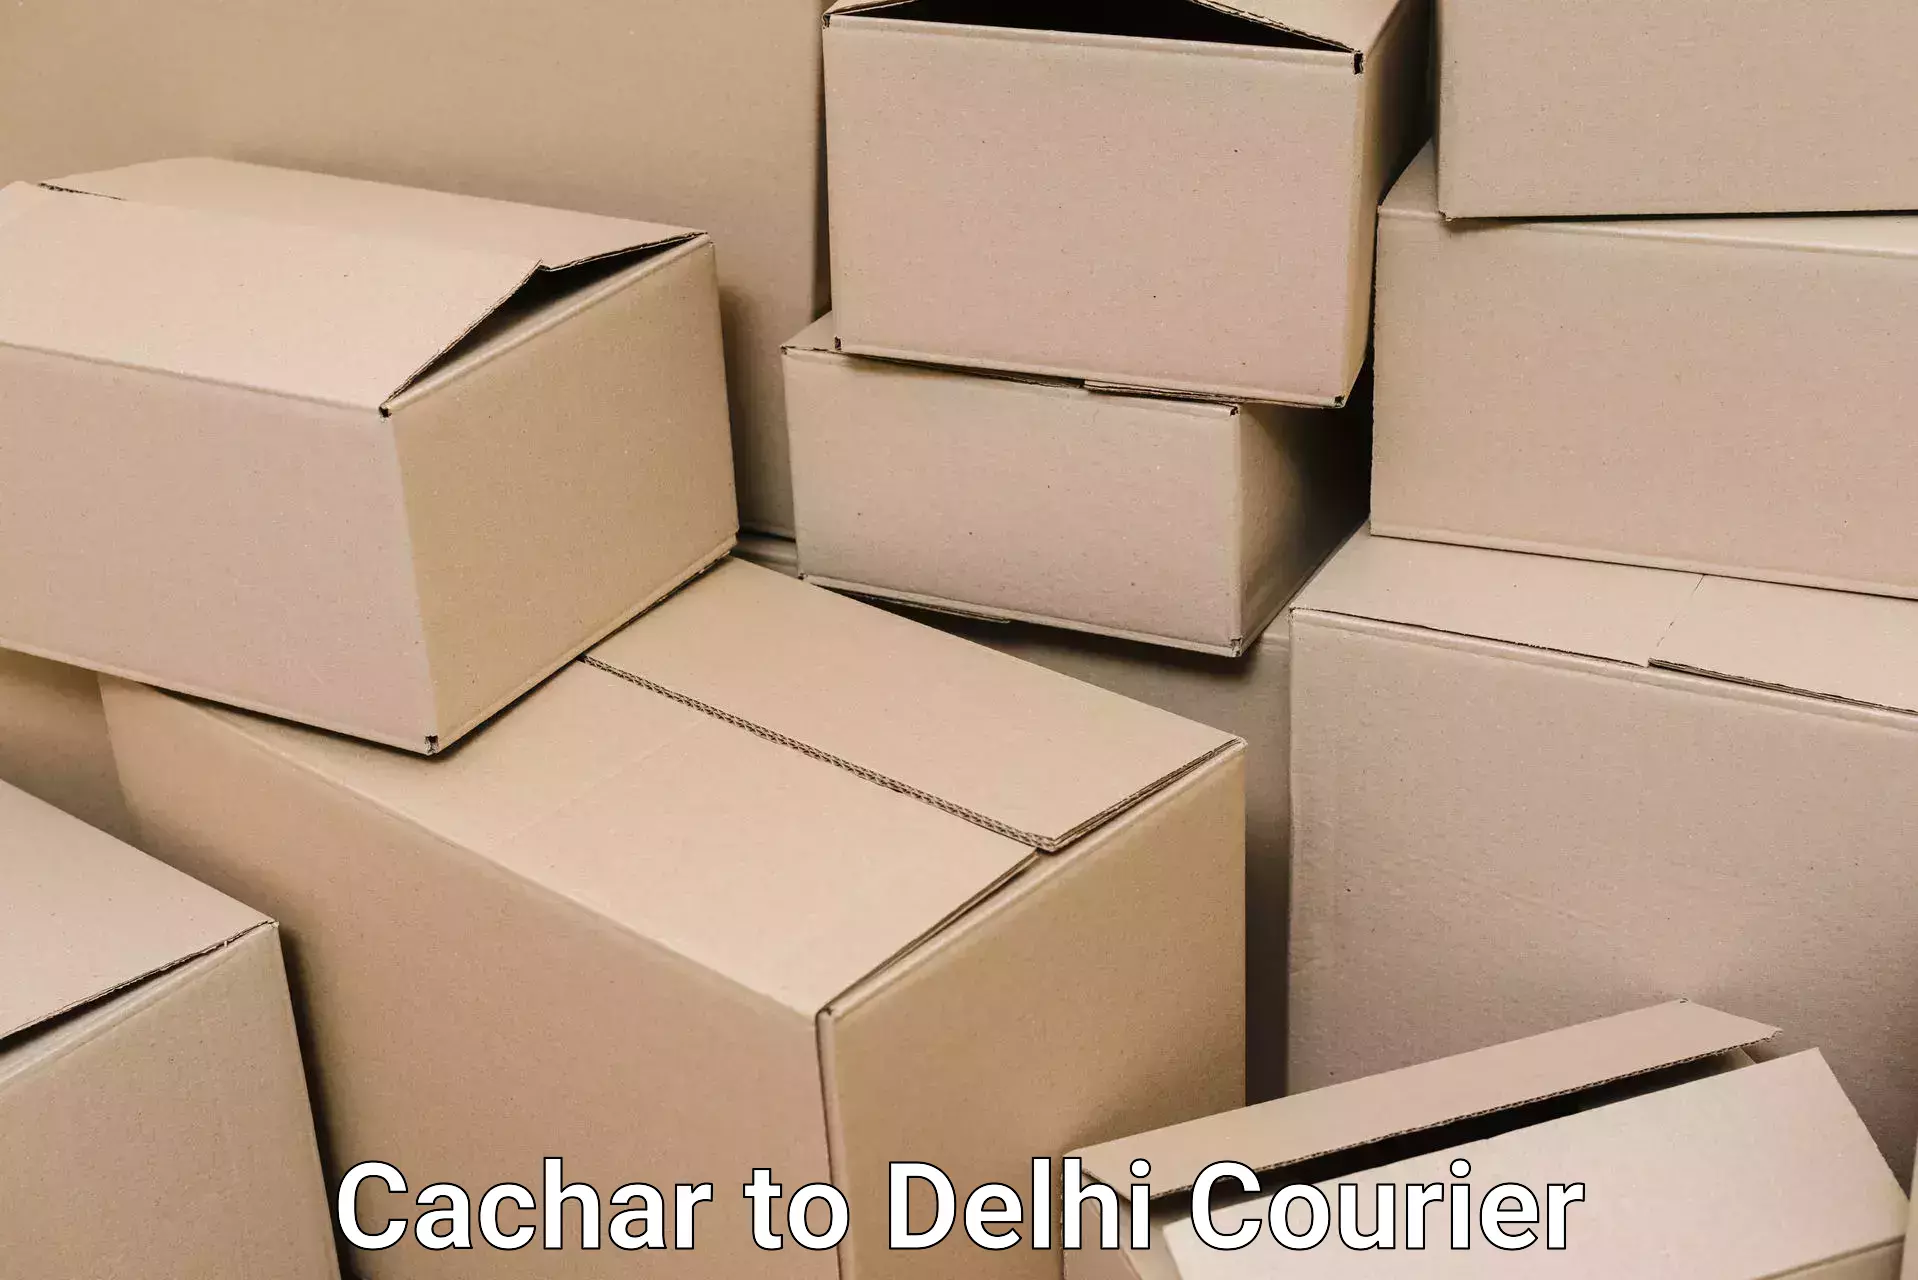 Moving and packing experts Cachar to University of Delhi